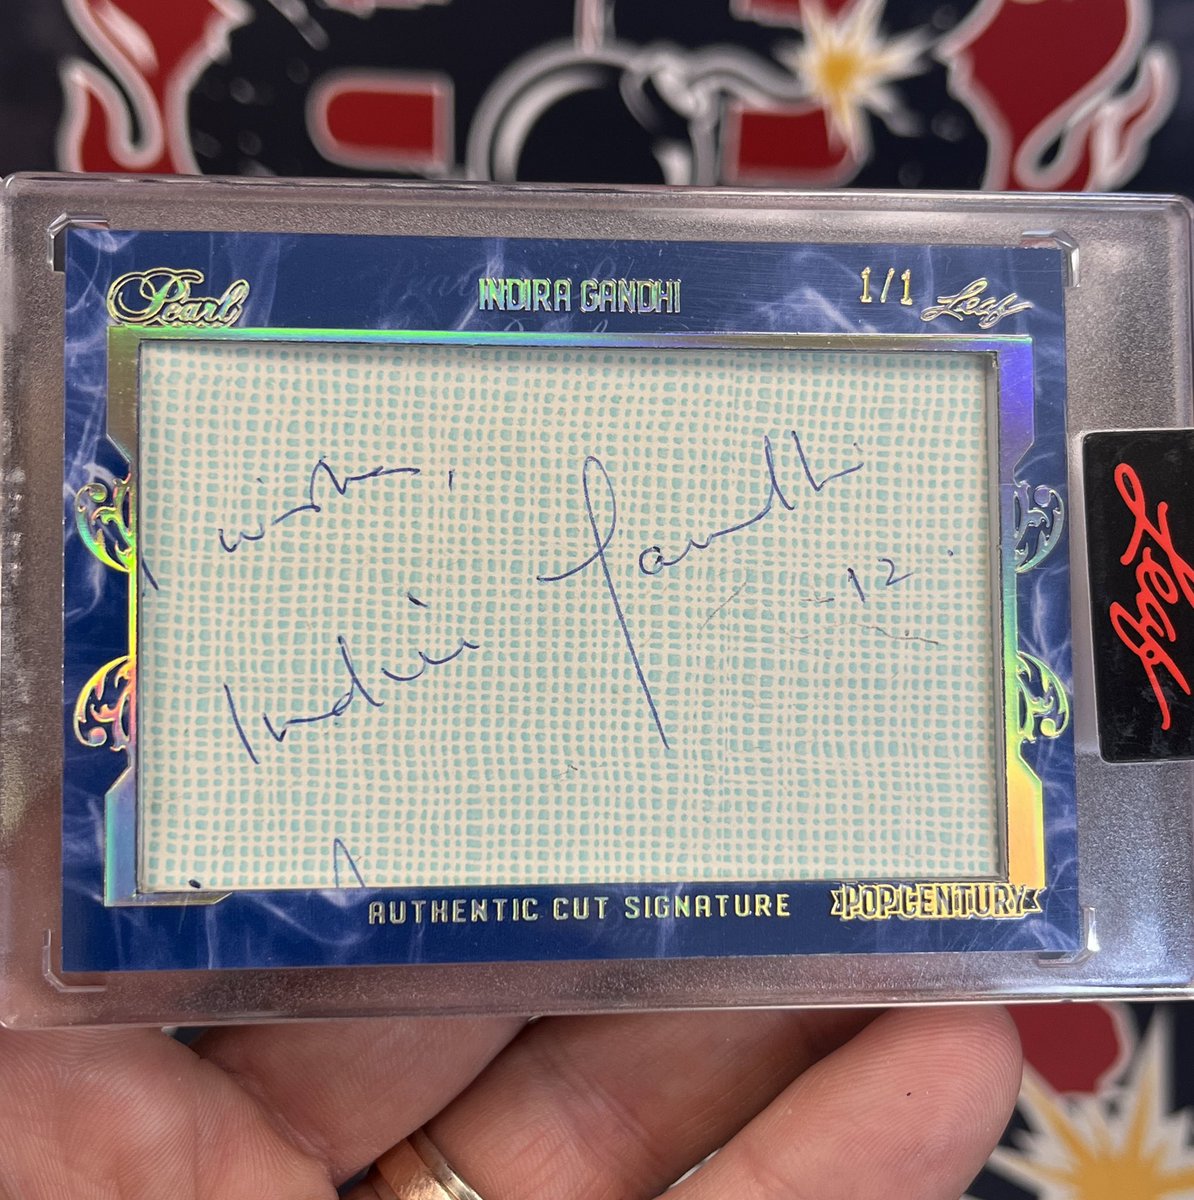 Indira Gandhi 1/1 Cut Signature Auto with a crazy pull from our @Leaf_Cards Metal Pop Century Breaks! 💥💥 #indiragandhi #india #cutsignature #oneofone #1of1 #groupbreaks #boxbreaks #casebreaks #thehobby #autograph #tradingcards #collect #like